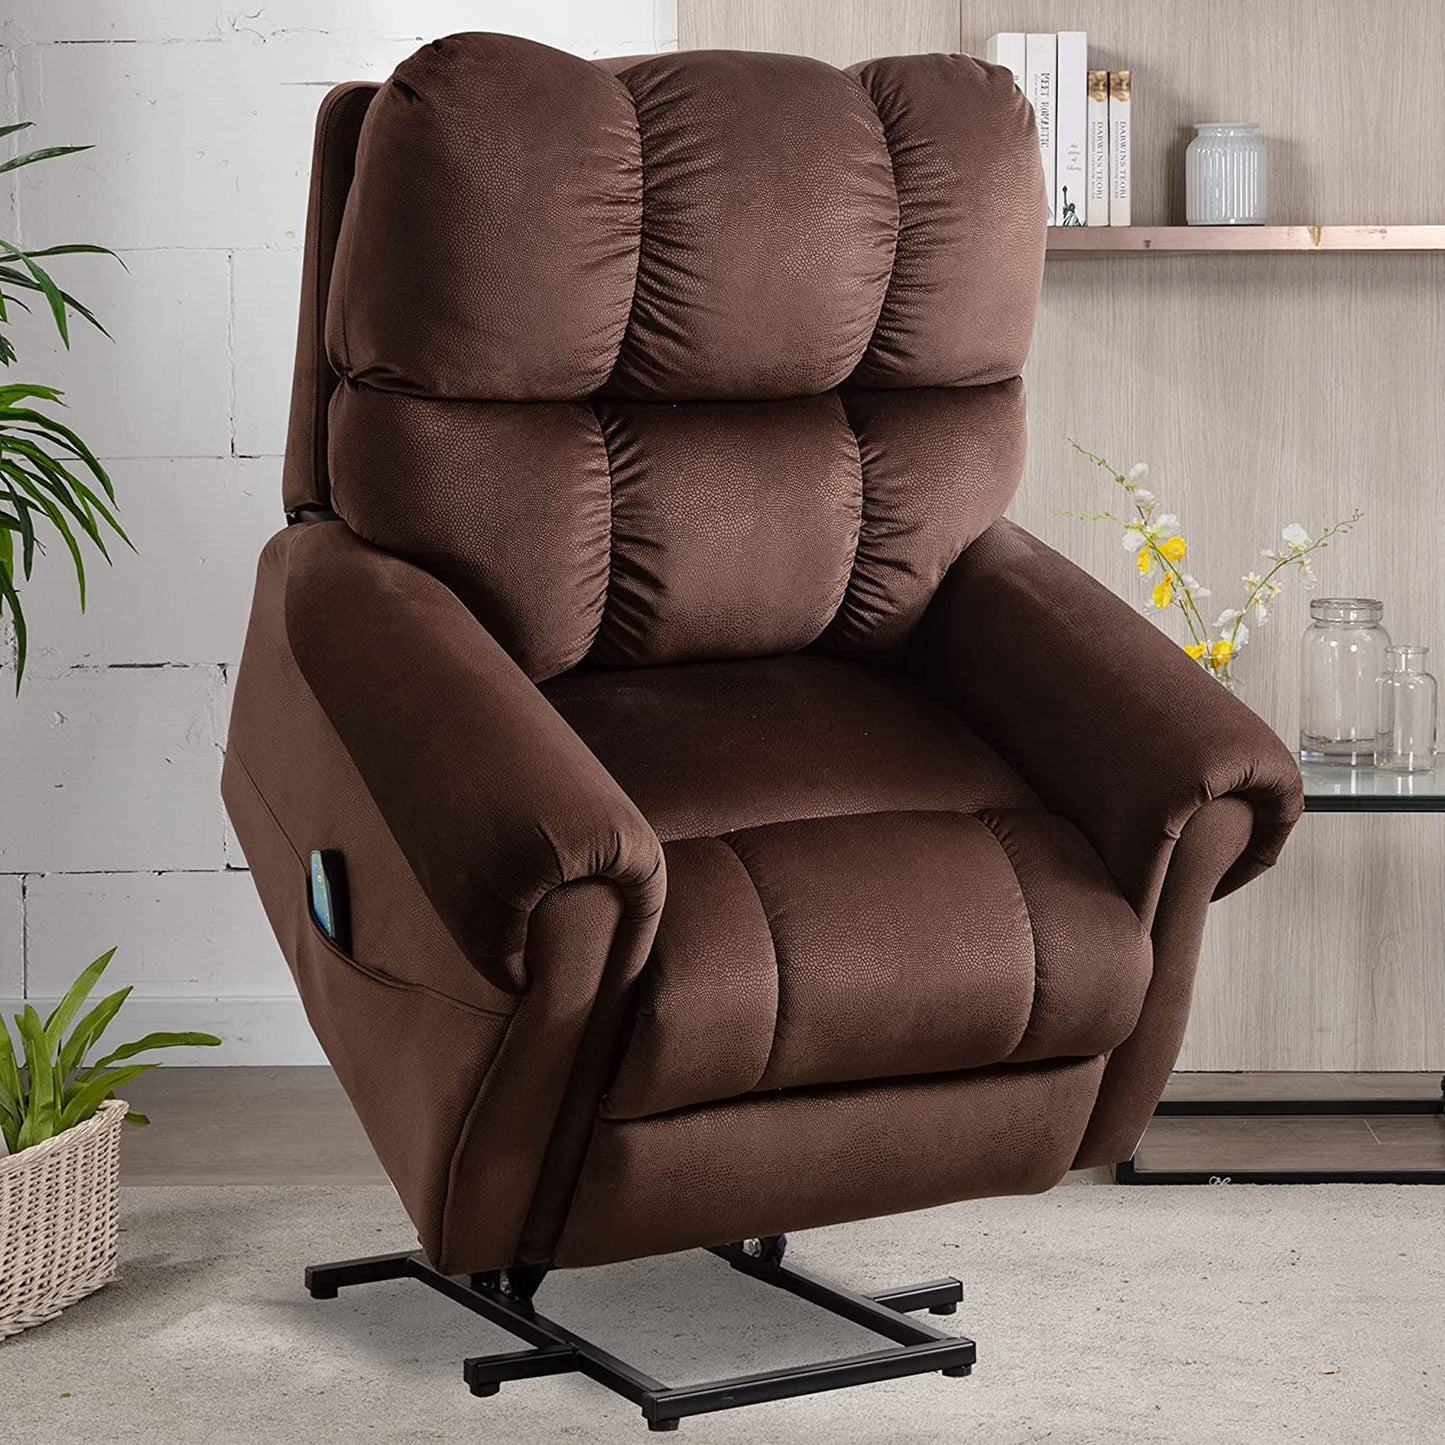 BTMWAY Power Lift Recliner, Electric Lift Chair with Heat Therapy and Massage Function, Power Reclining Sofa with Remote Control